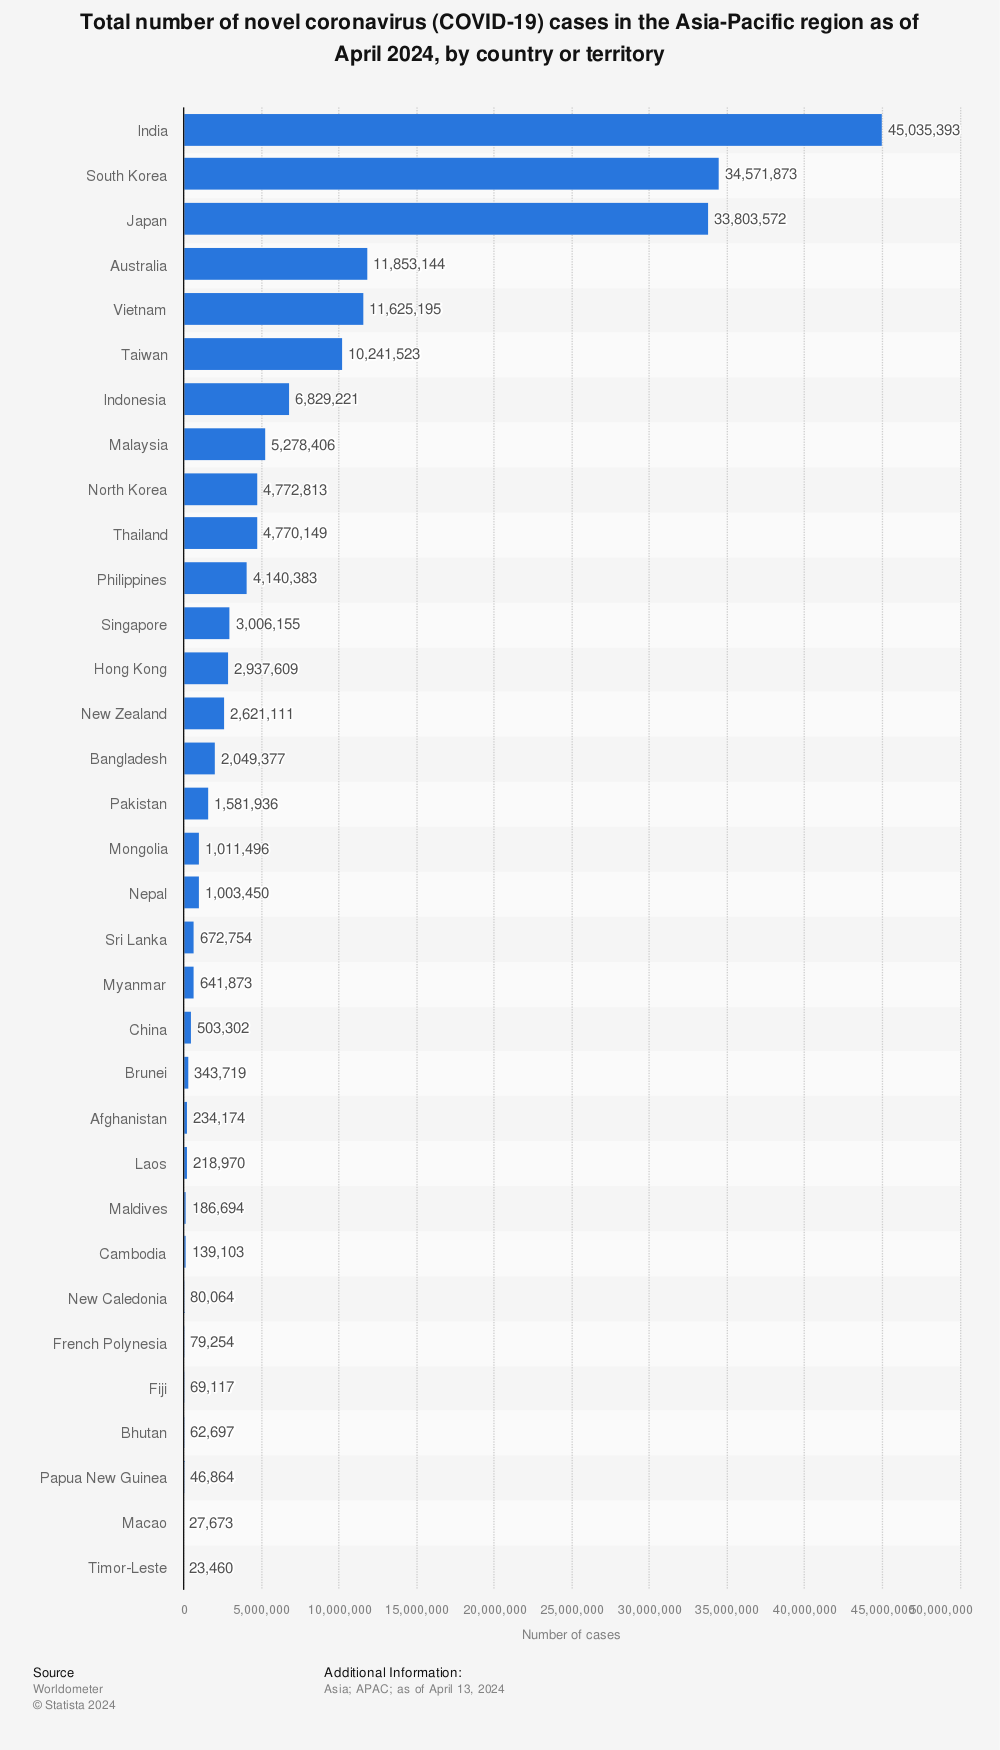 Statistic: Total number of novel coronavirus (COVID-19) cases in the Asia-Pacific region as of December 12, 2022, by country or territory  | Statista